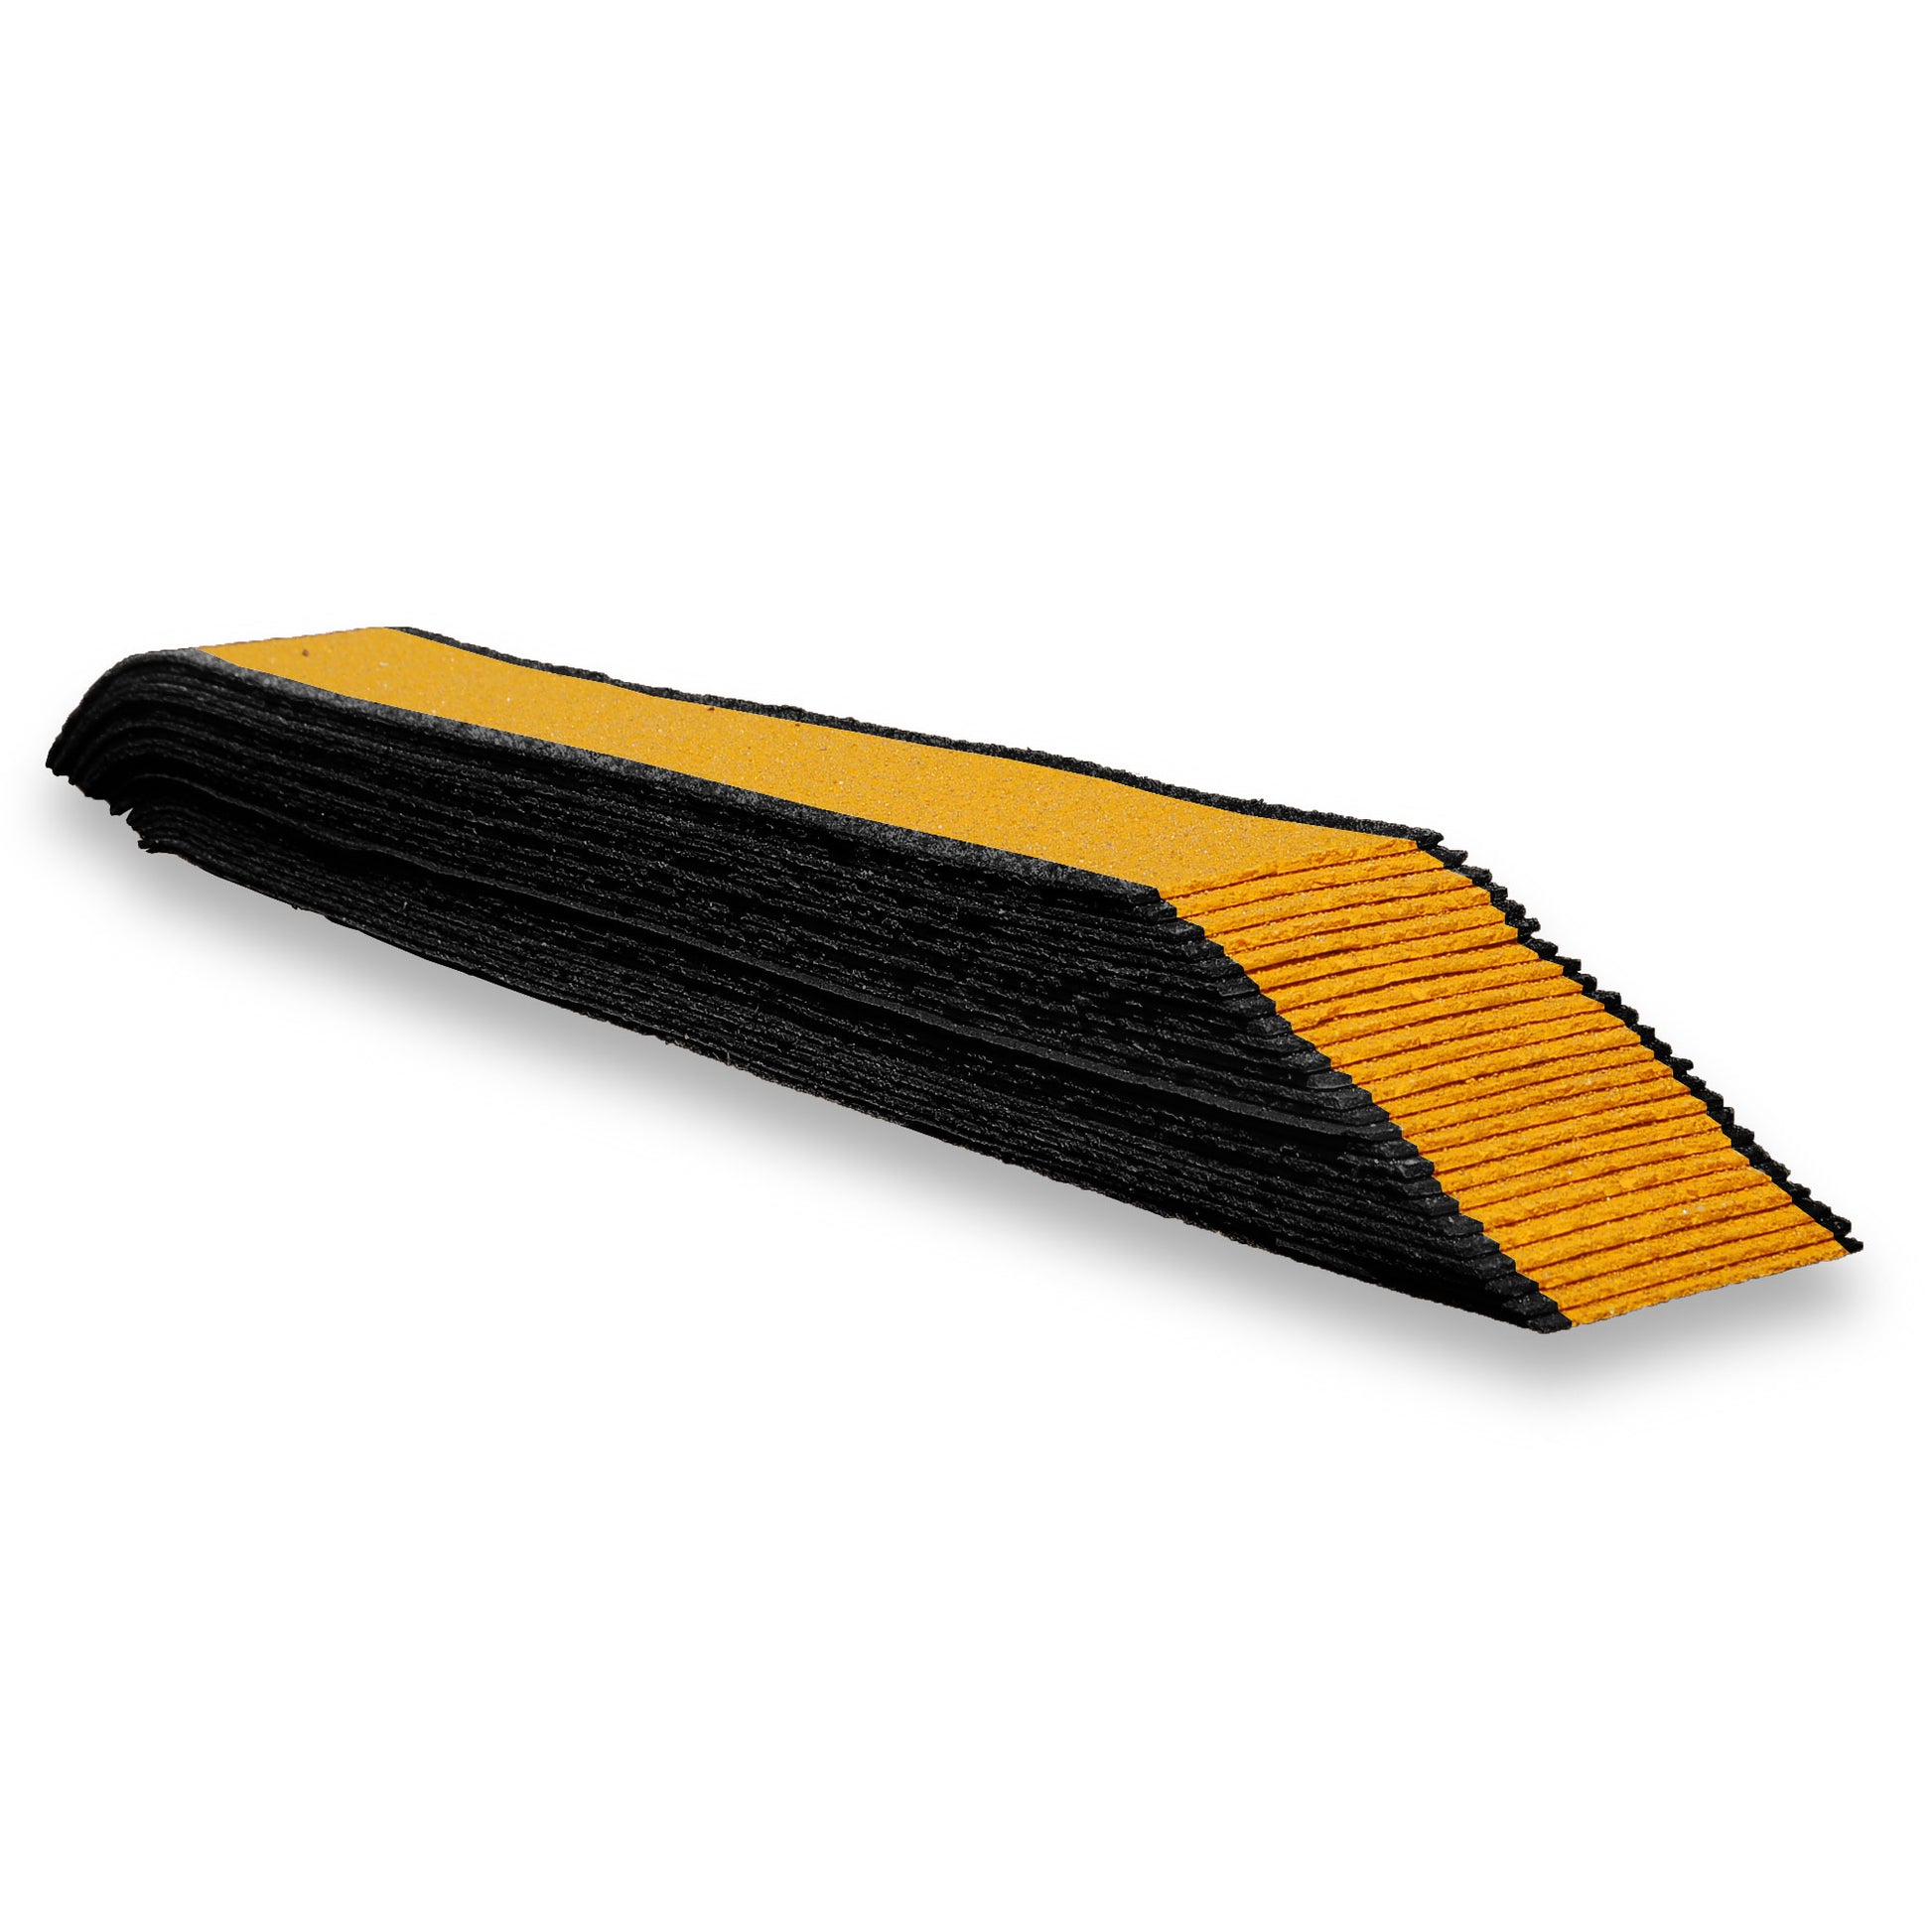 A stack of preformed thermoplastic lines that are yellow with black borders